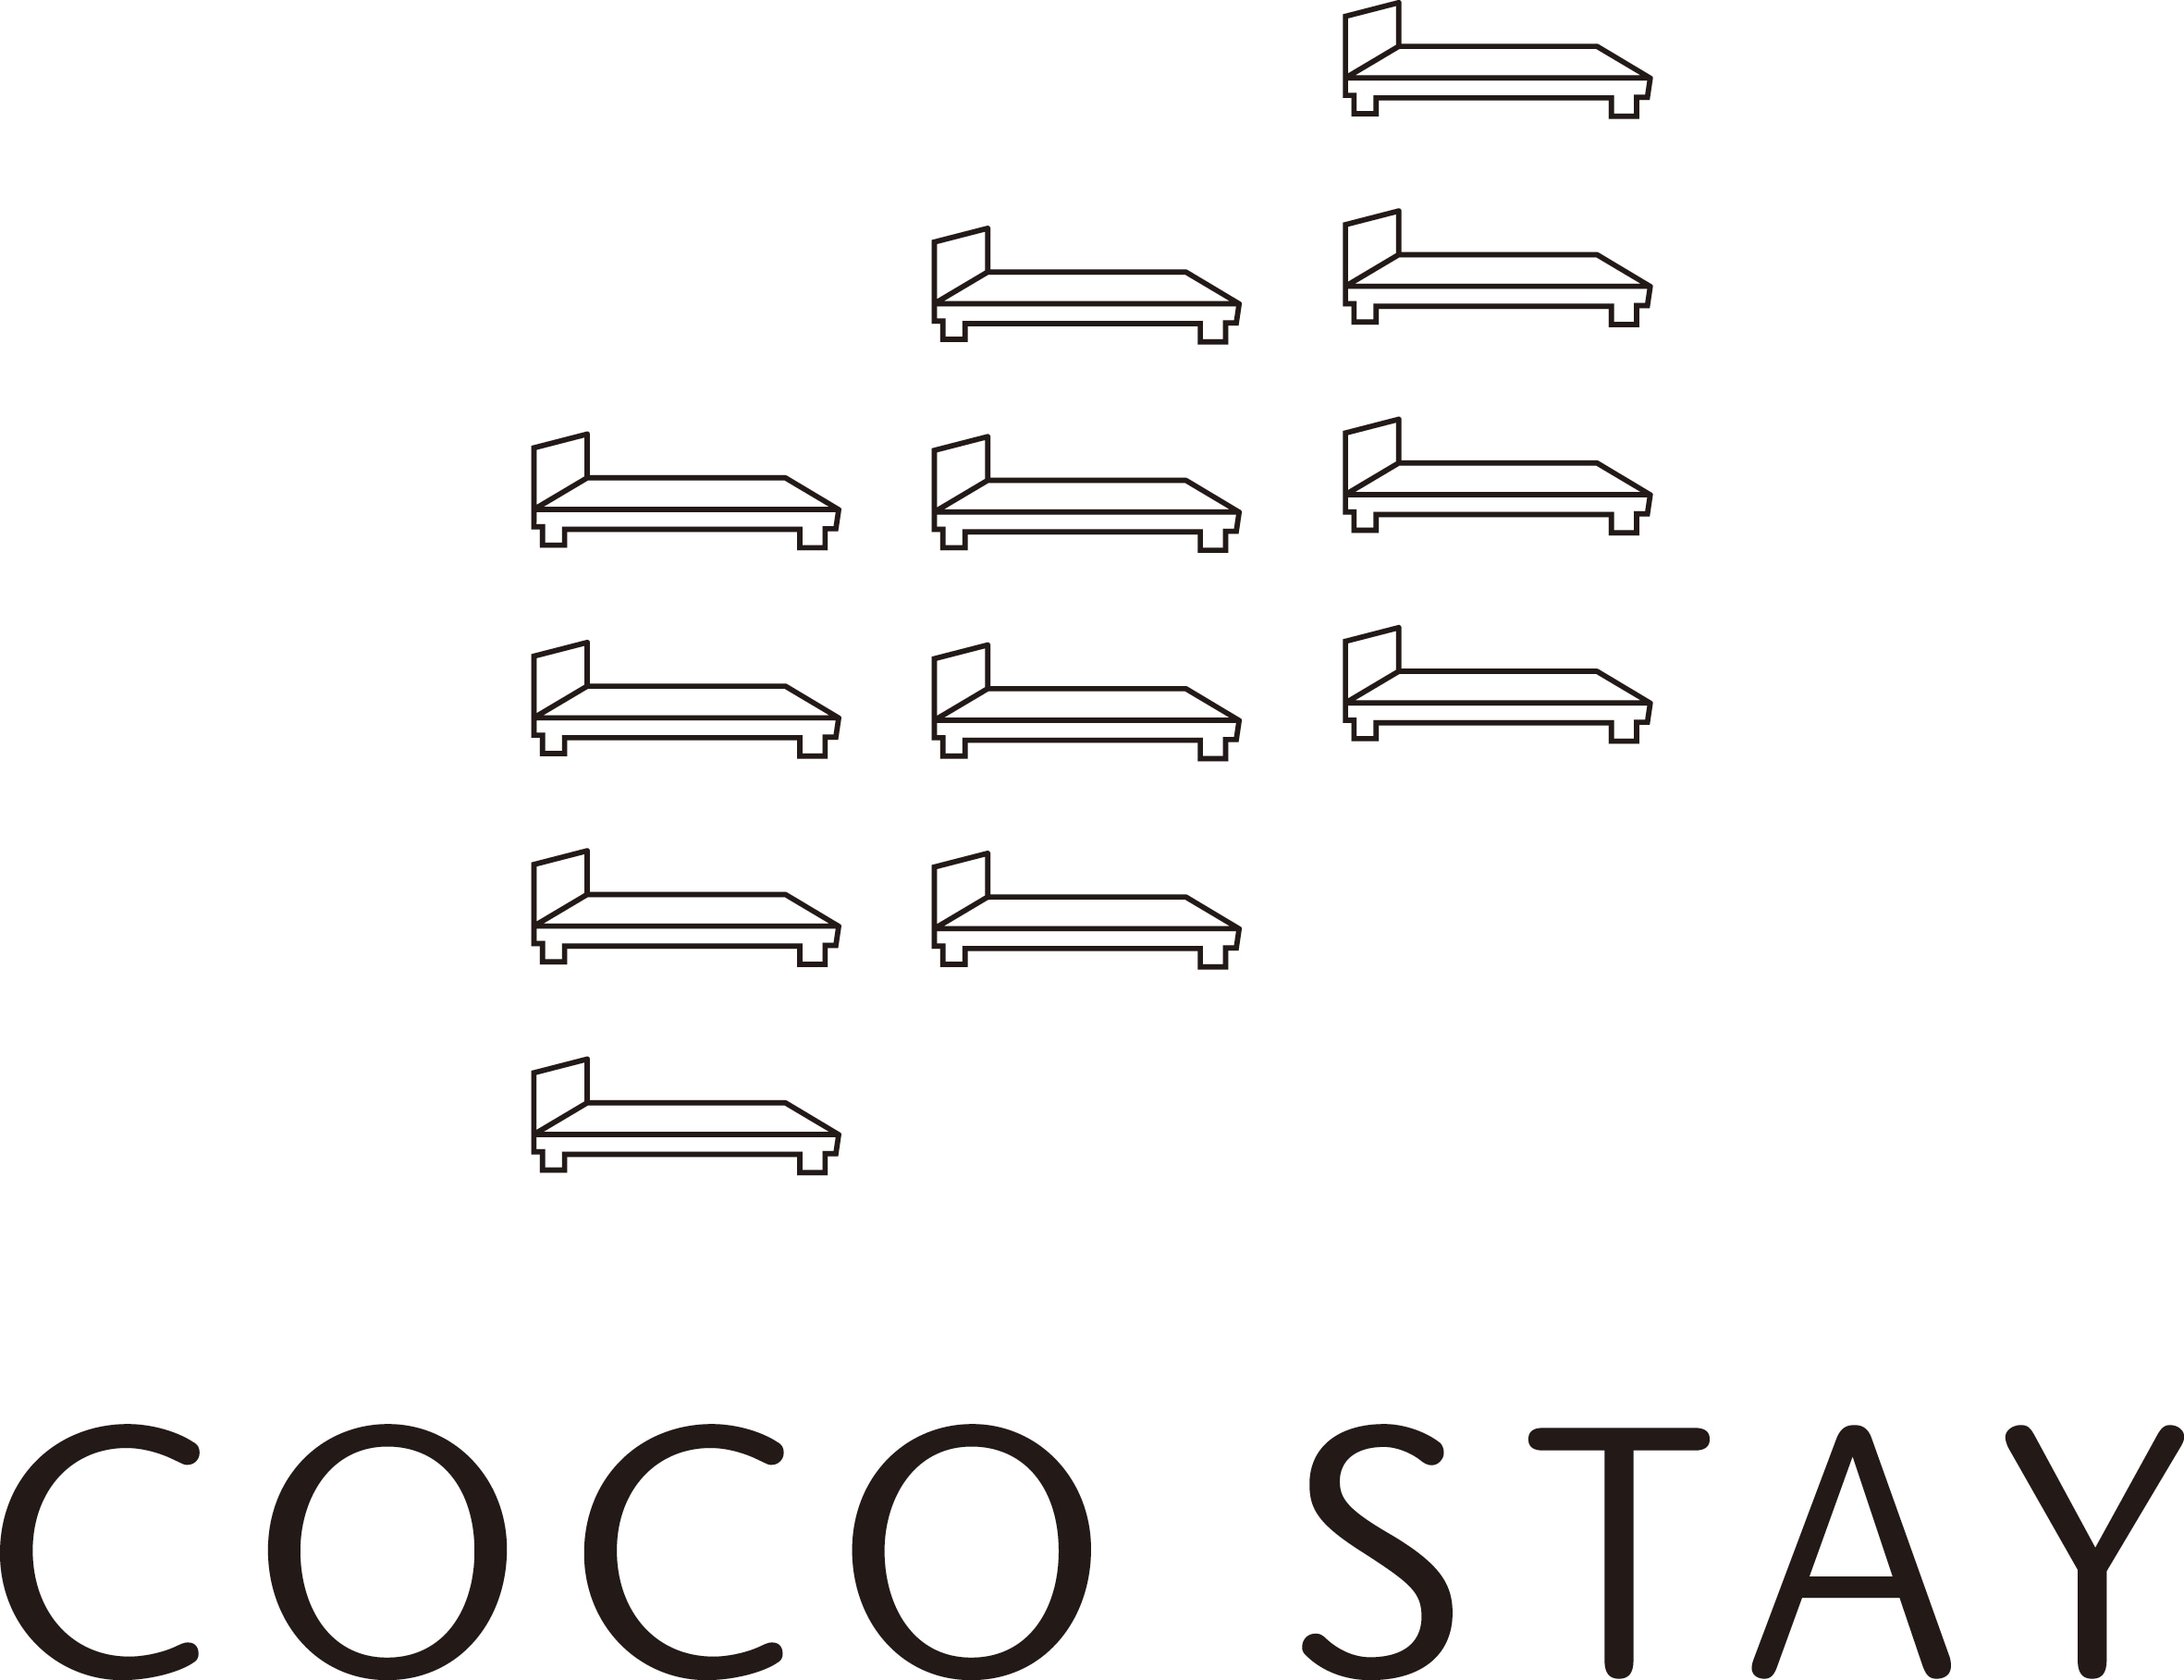 [COCO STAY] Standard plan